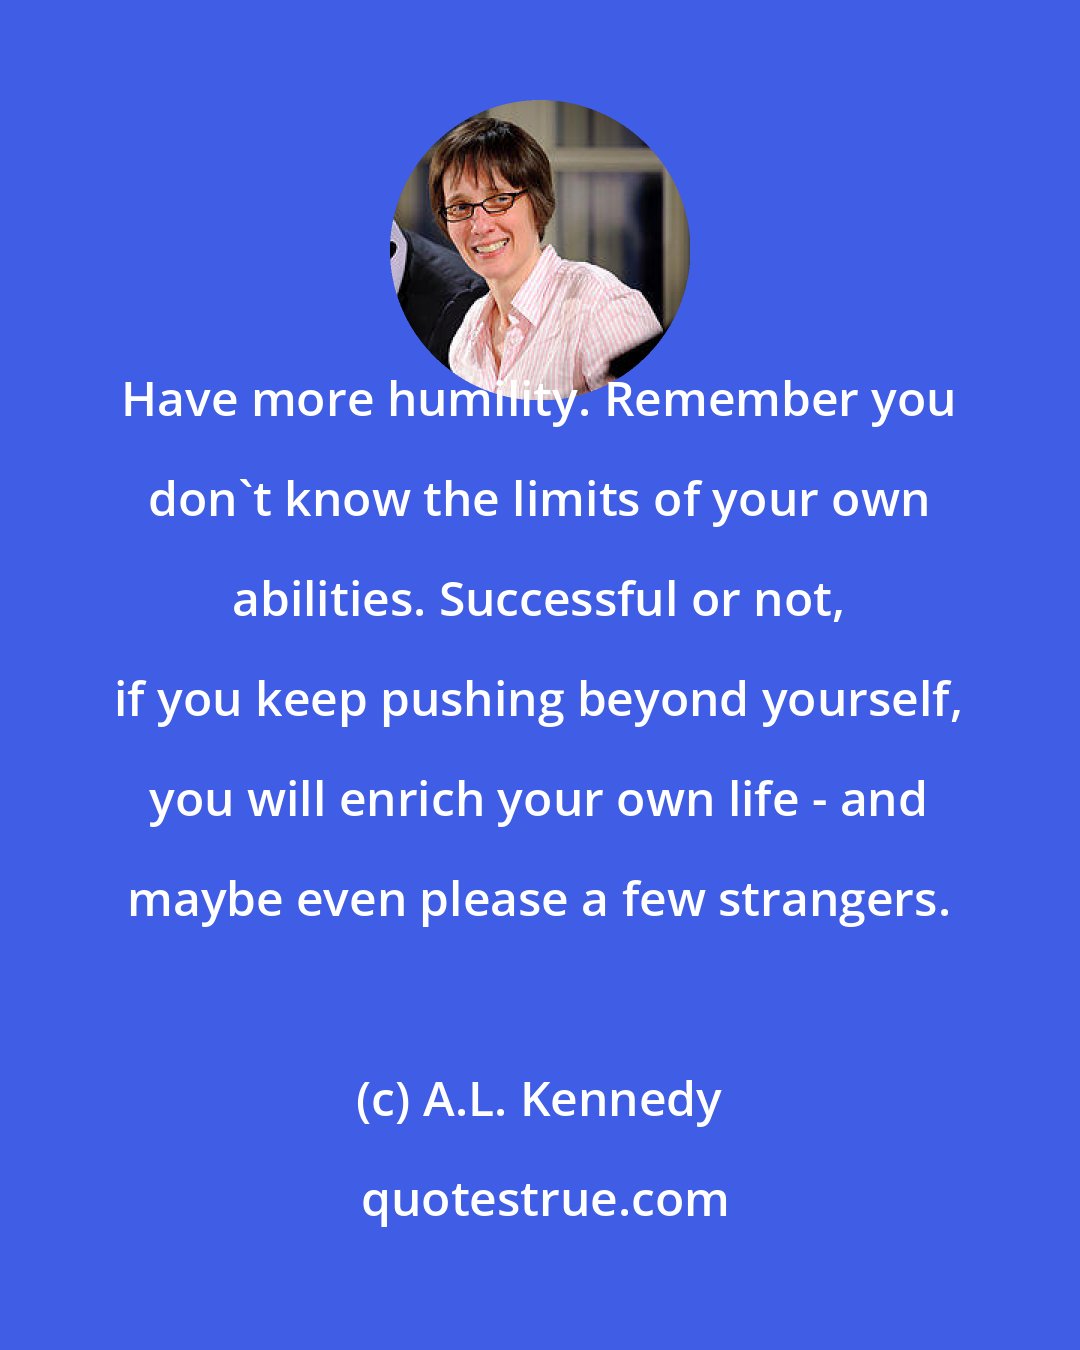 A.L. Kennedy: Have more humility. Remember you don't know the limits of your own abilities. Successful or not, if you keep pushing beyond yourself, you will enrich your own life - and maybe even please a few strangers.